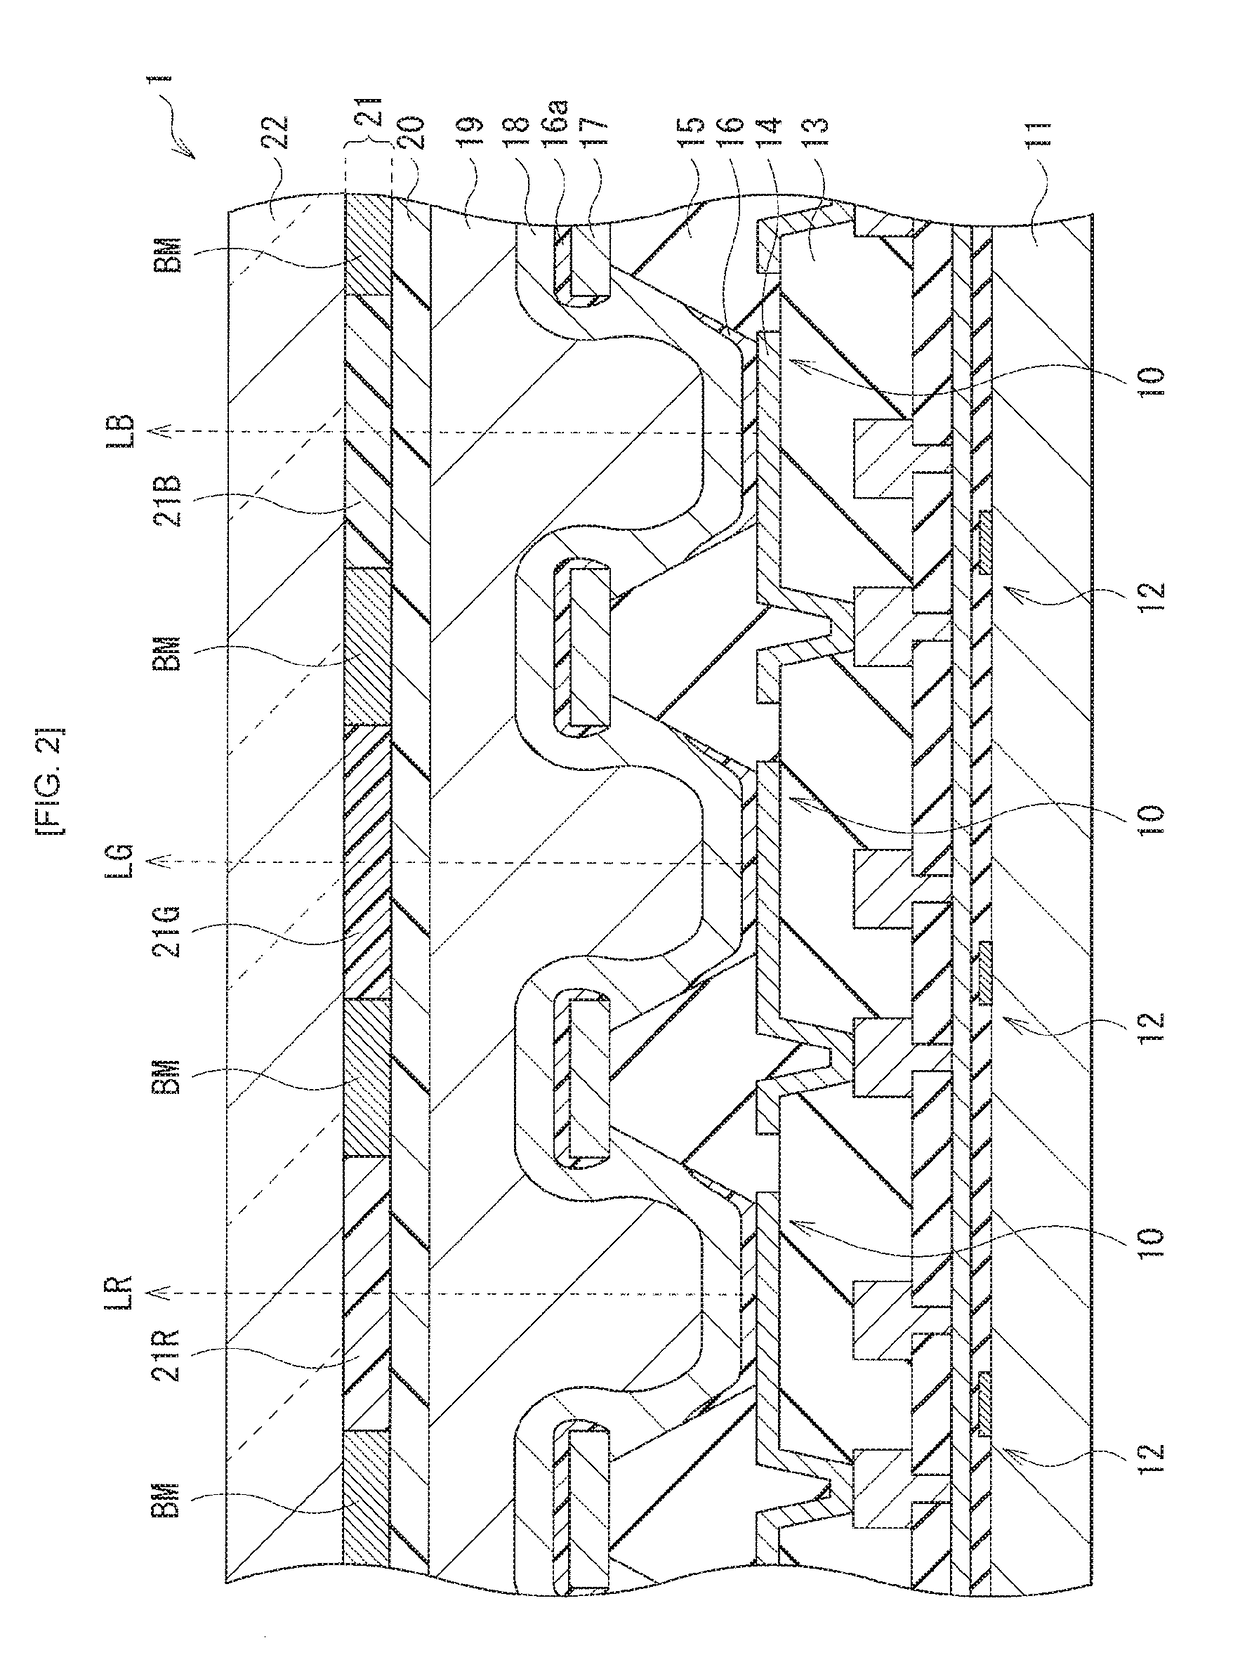 Display unit, method of manufacturing display unit, and electronic apparatus